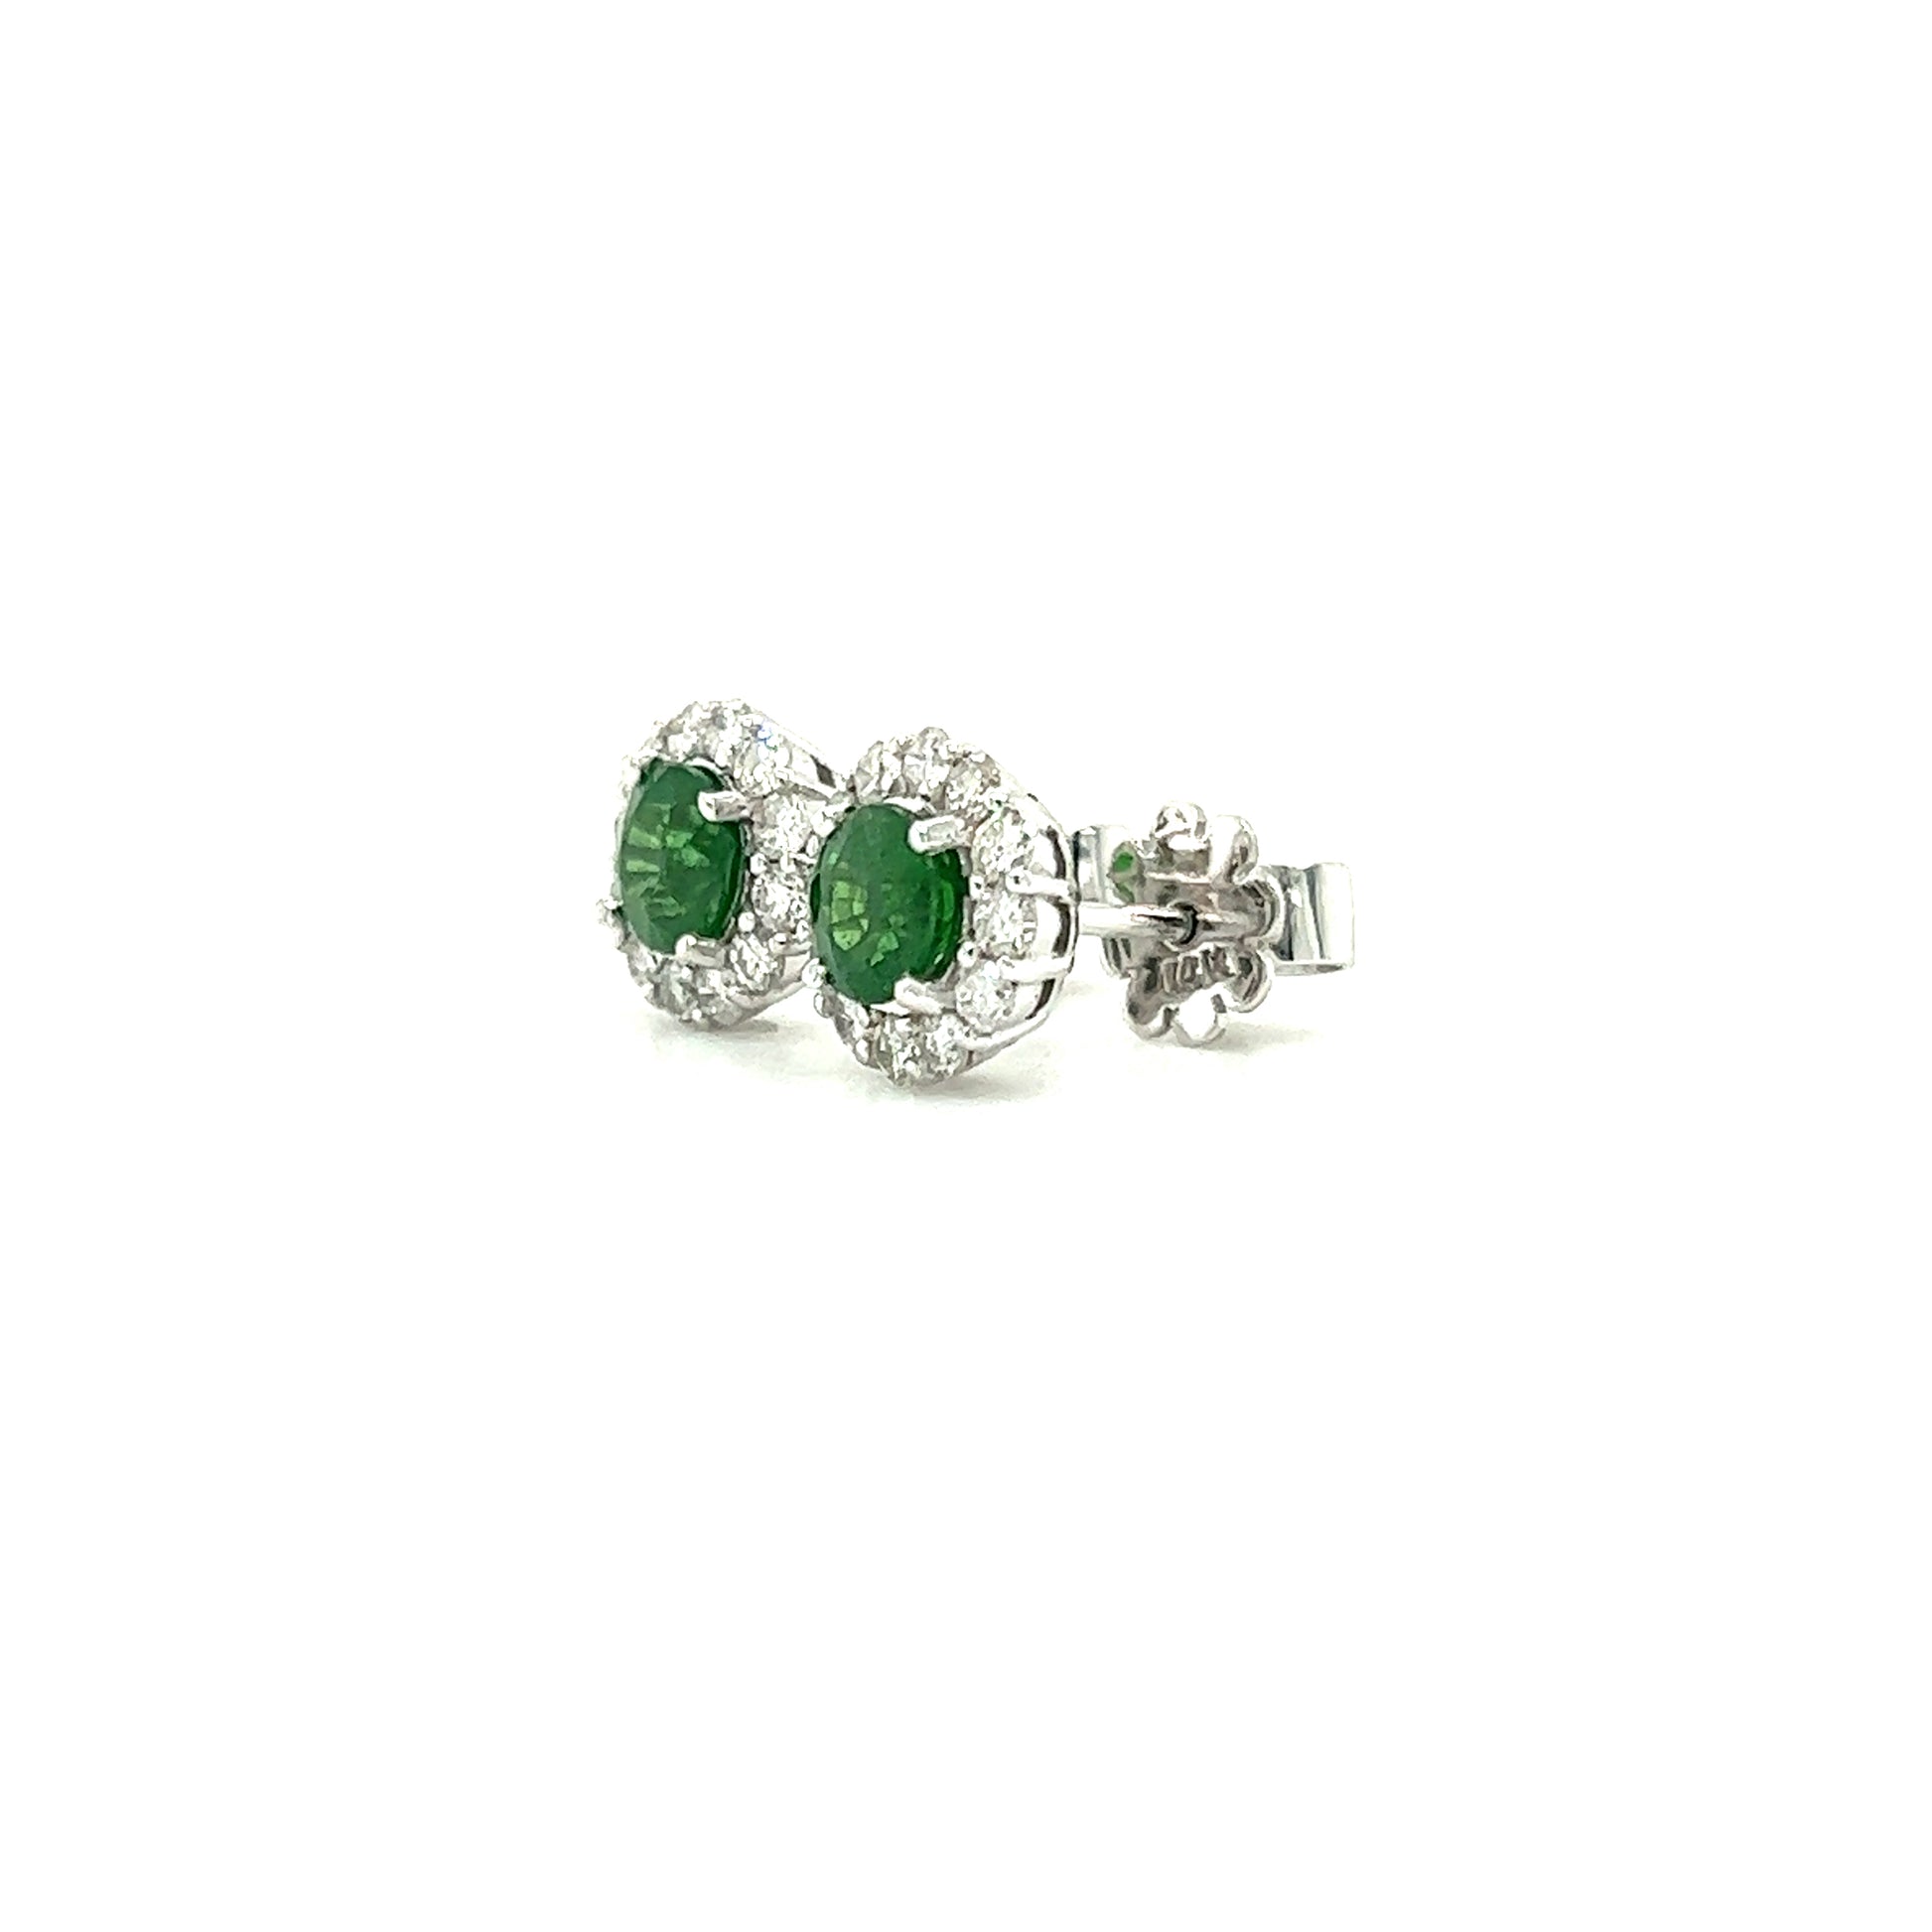 Round Tsavorite Stud Earrings with 0.56ctw of Diamonds in 14K White Gold Right Side View